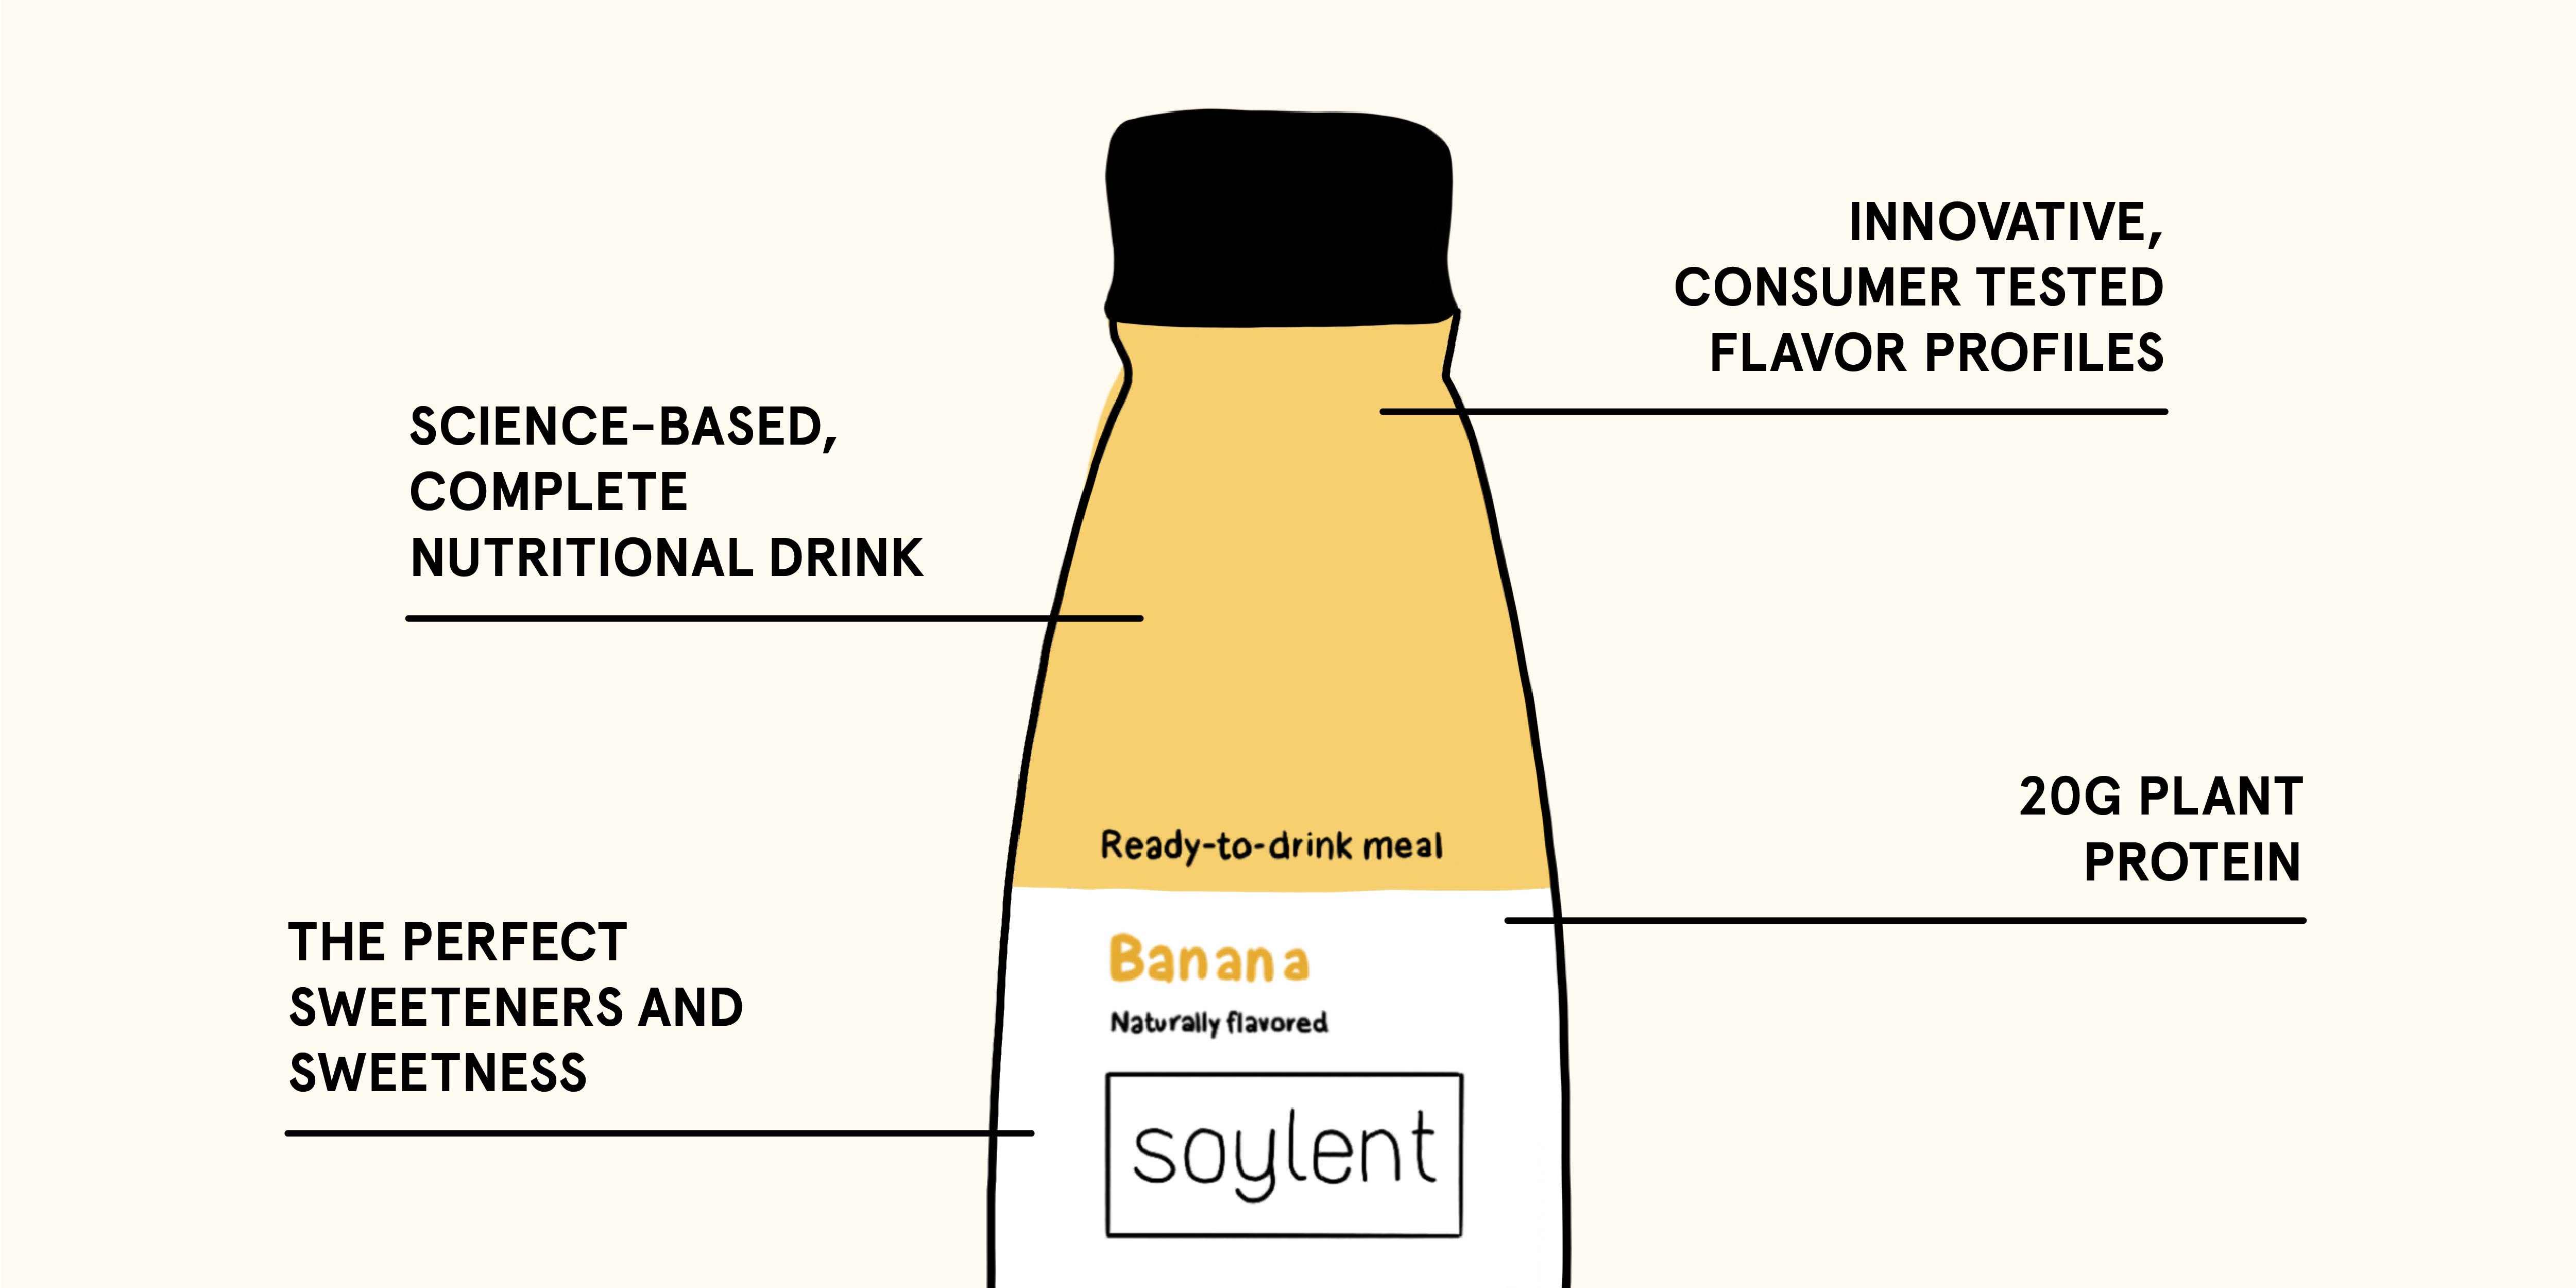 Soylent Drinks are science-based, have 20g of plant protein, and consumer tested flavor profiles.